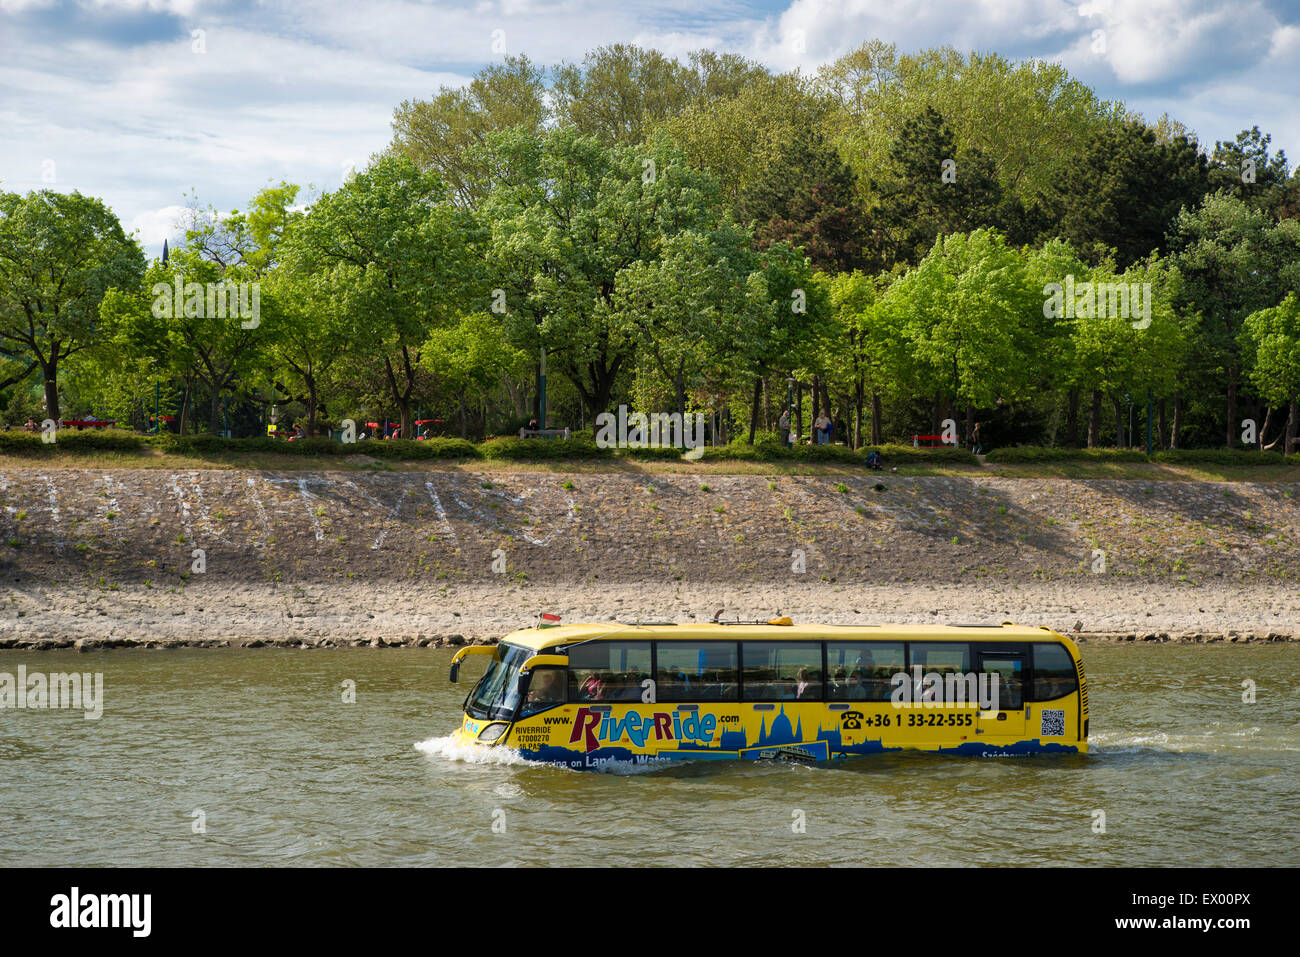 Bus swimming in river Danube, Margit Island in the back, Budapest, Hungary, Europe Stock Photo